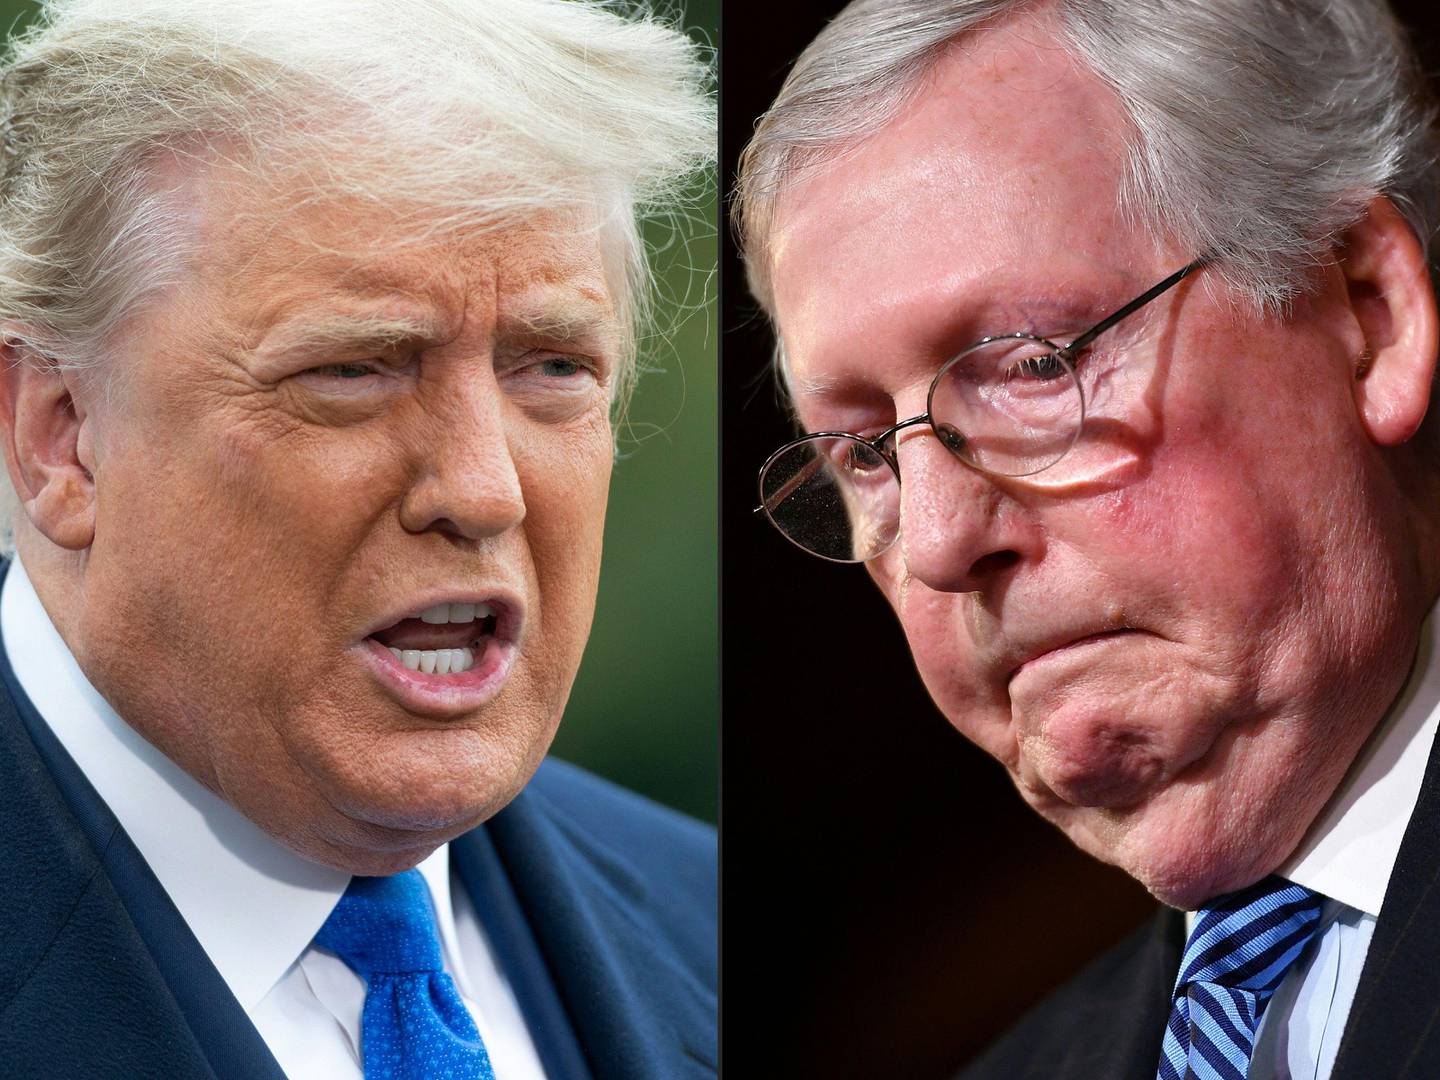 (COMBO) This combination of pictures created on February 16, 2021 shows
US President Donald Trump in Washington, DC, October 27, 2020 and 
US Senate Majority Leader Mitch McConnell (R-KY)on Capitol Hill in Washington, DC on February 5, 2020. - Donald Trump urged Republican senators February 16, 2021 to dump Mitch McConnell as their leader in the Senate following his withering criticism of the former US president after his impeachment trial. (Photos by SAUL LOEB and Mandel NGAN / AFP)